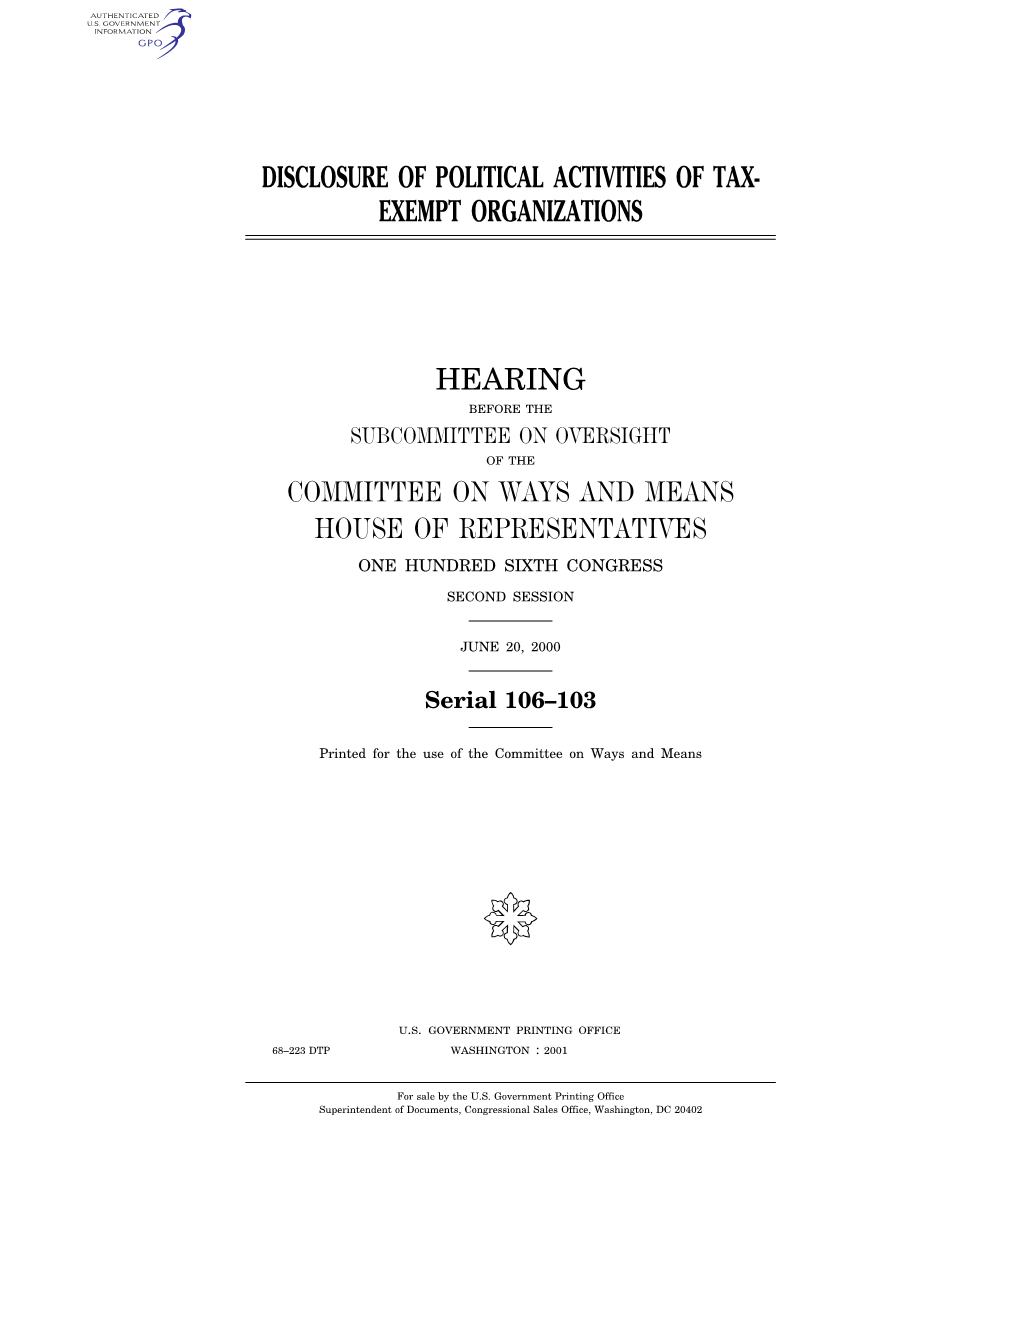 Disclosure of Political Activities of Tax- Exempt Organizations